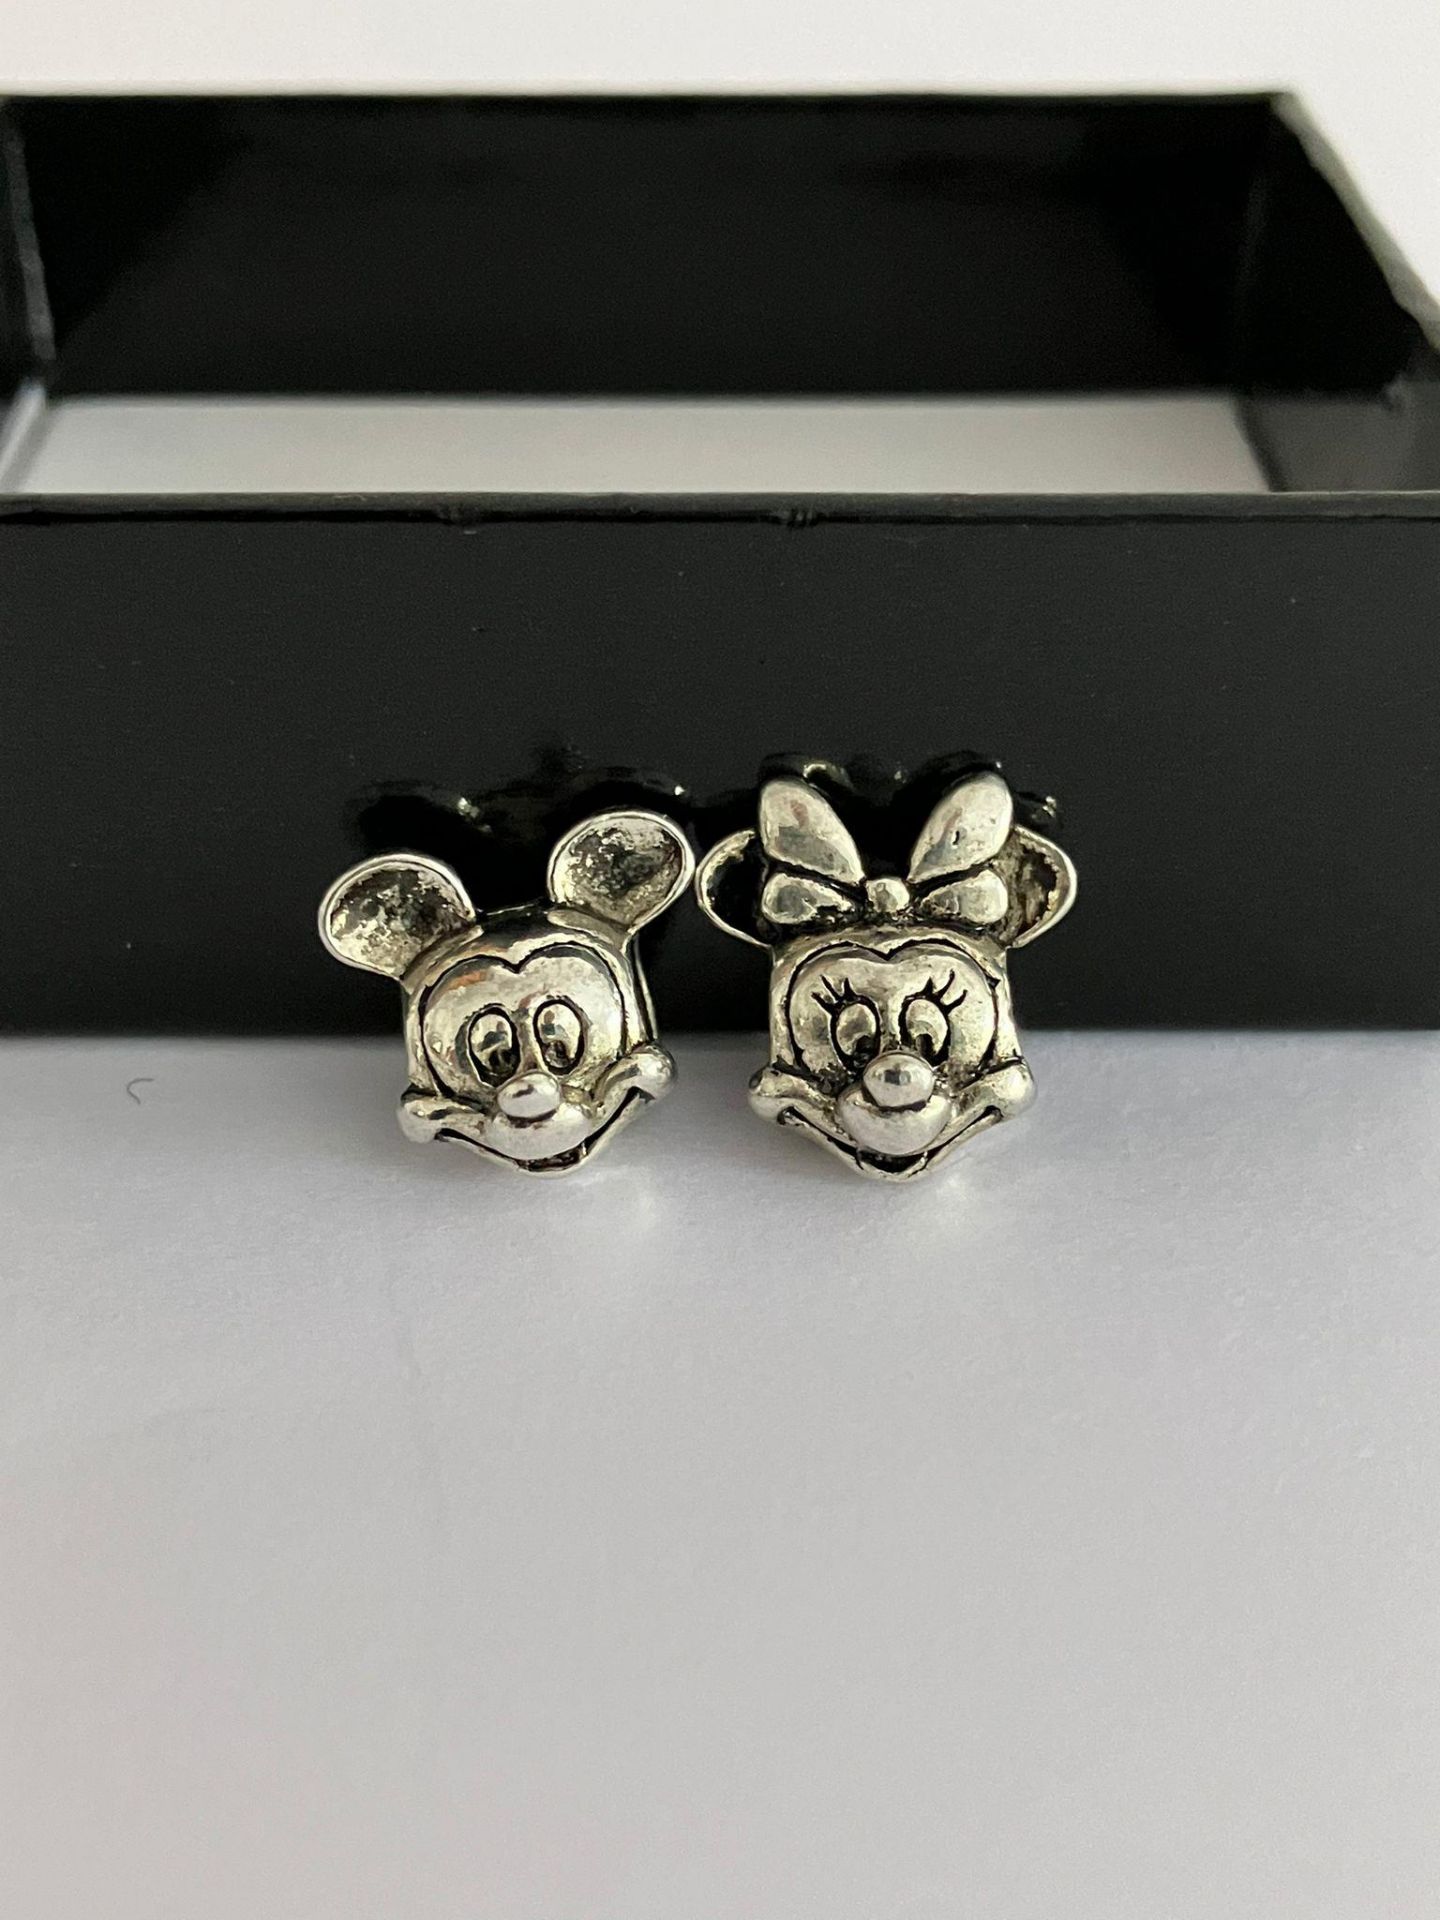 Genuine PANDORA MICKEY & MINNIE MOUSE SILVER BRACELET CHARMS. Complete with a full set of Pandora